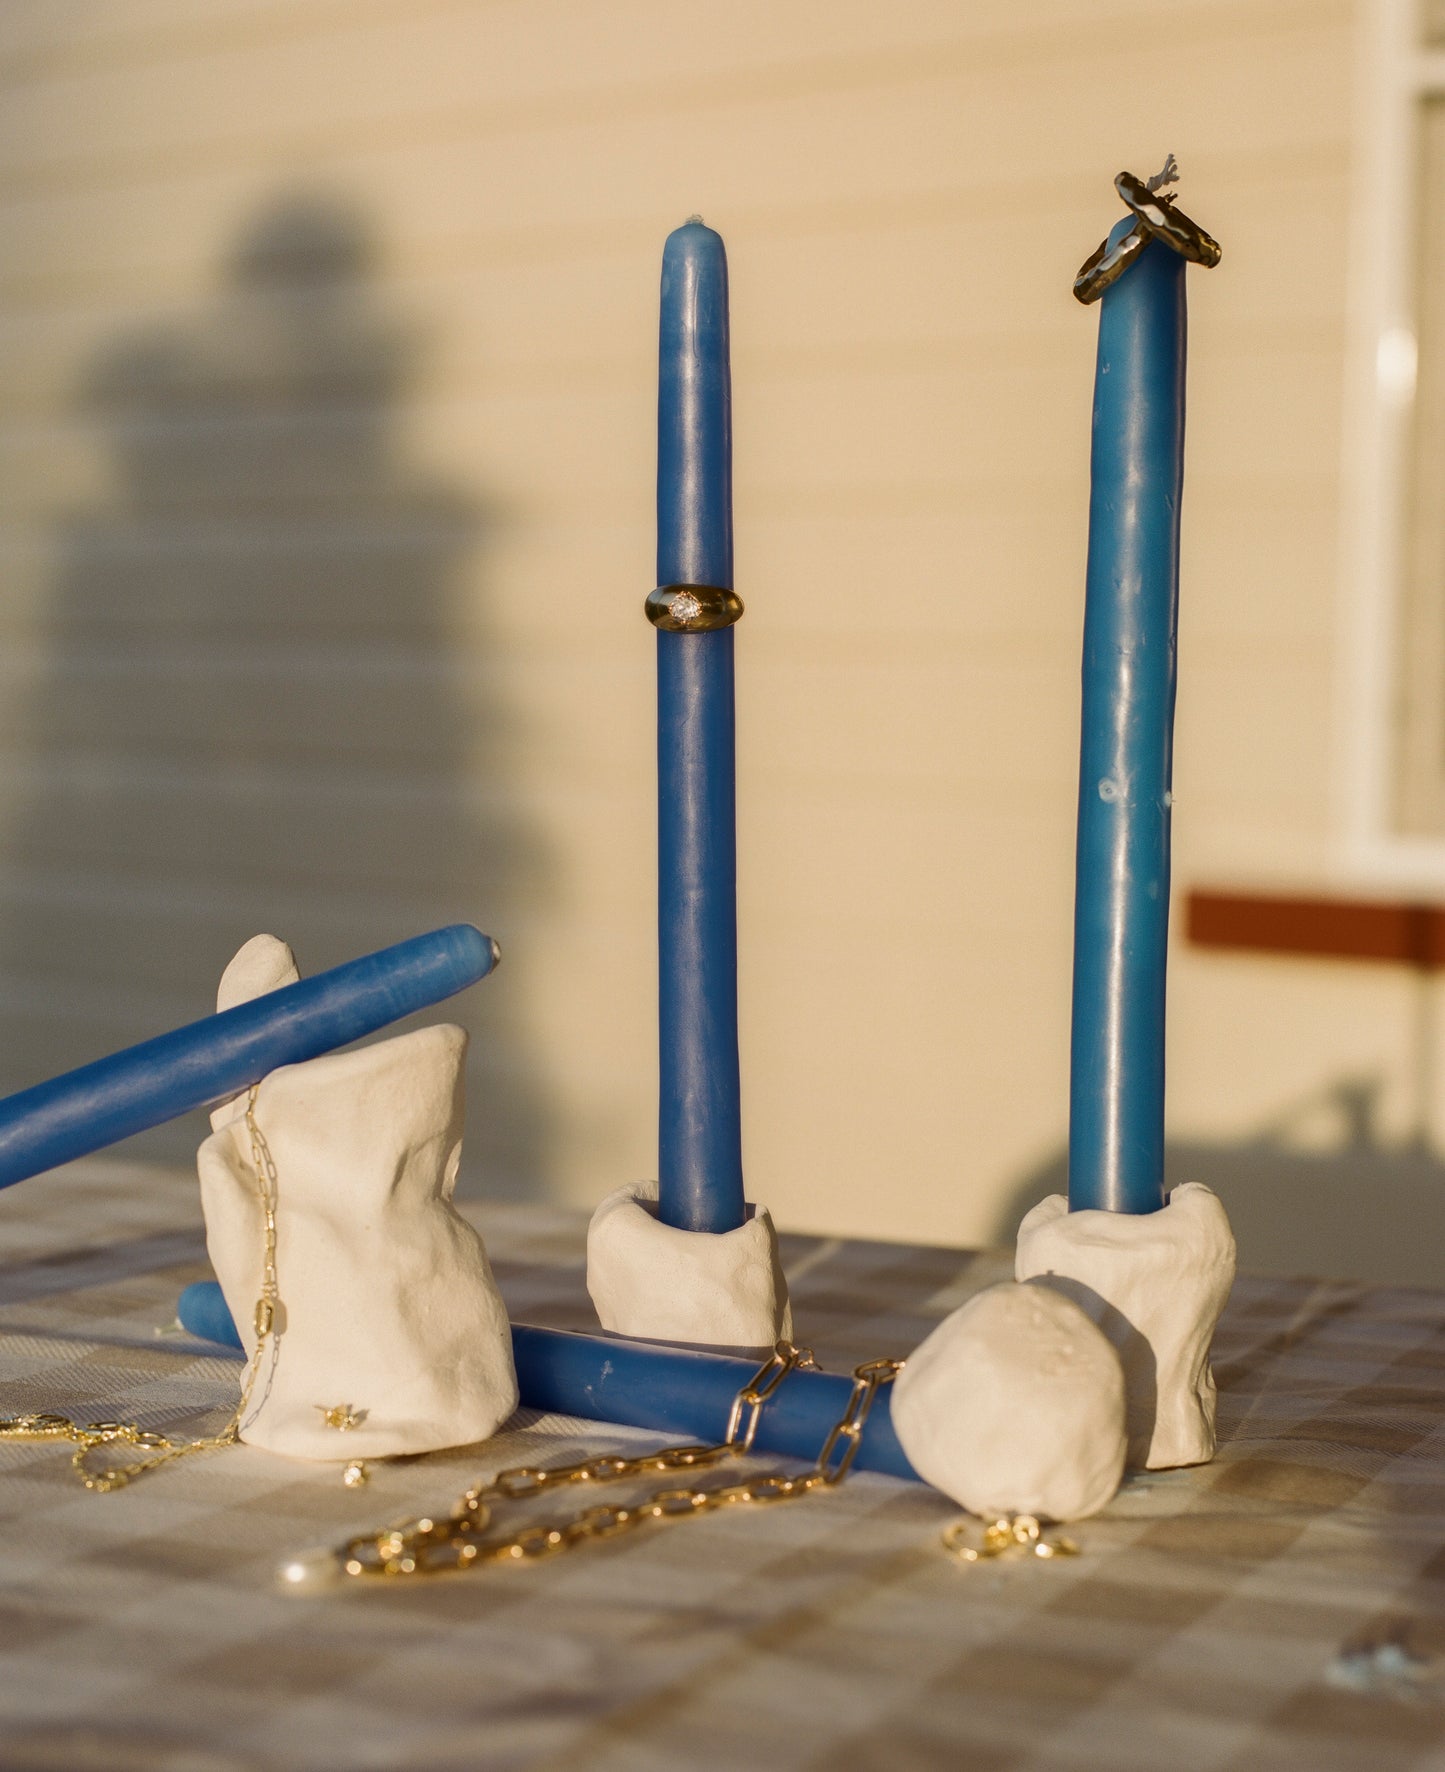 Blue candles and jewellery